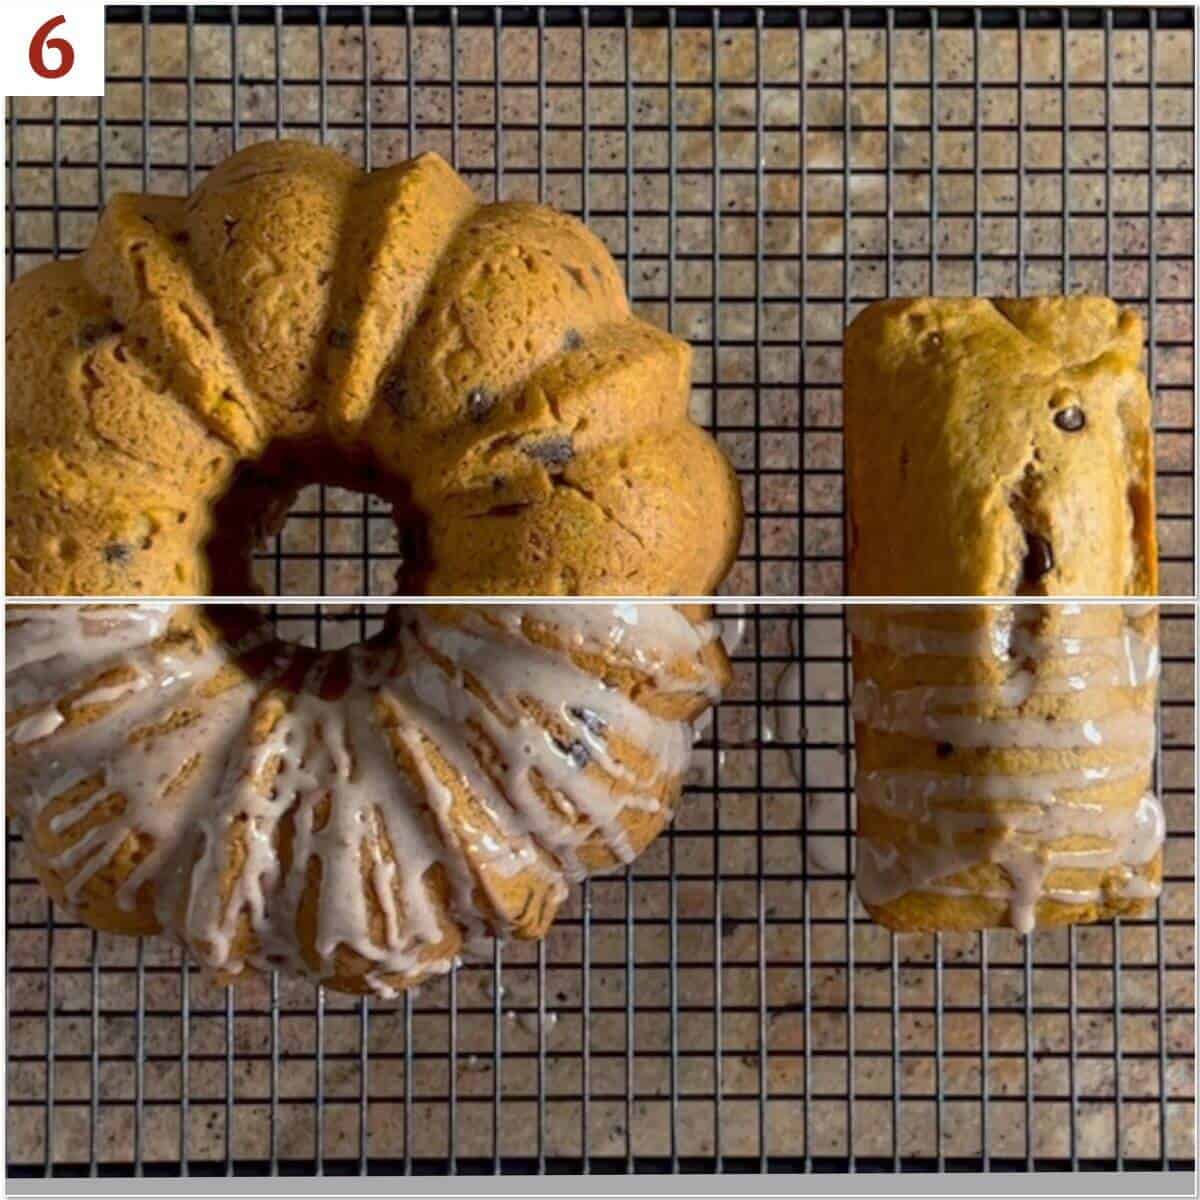 Collage of before & after glazing the small bundt cake and tea bread.